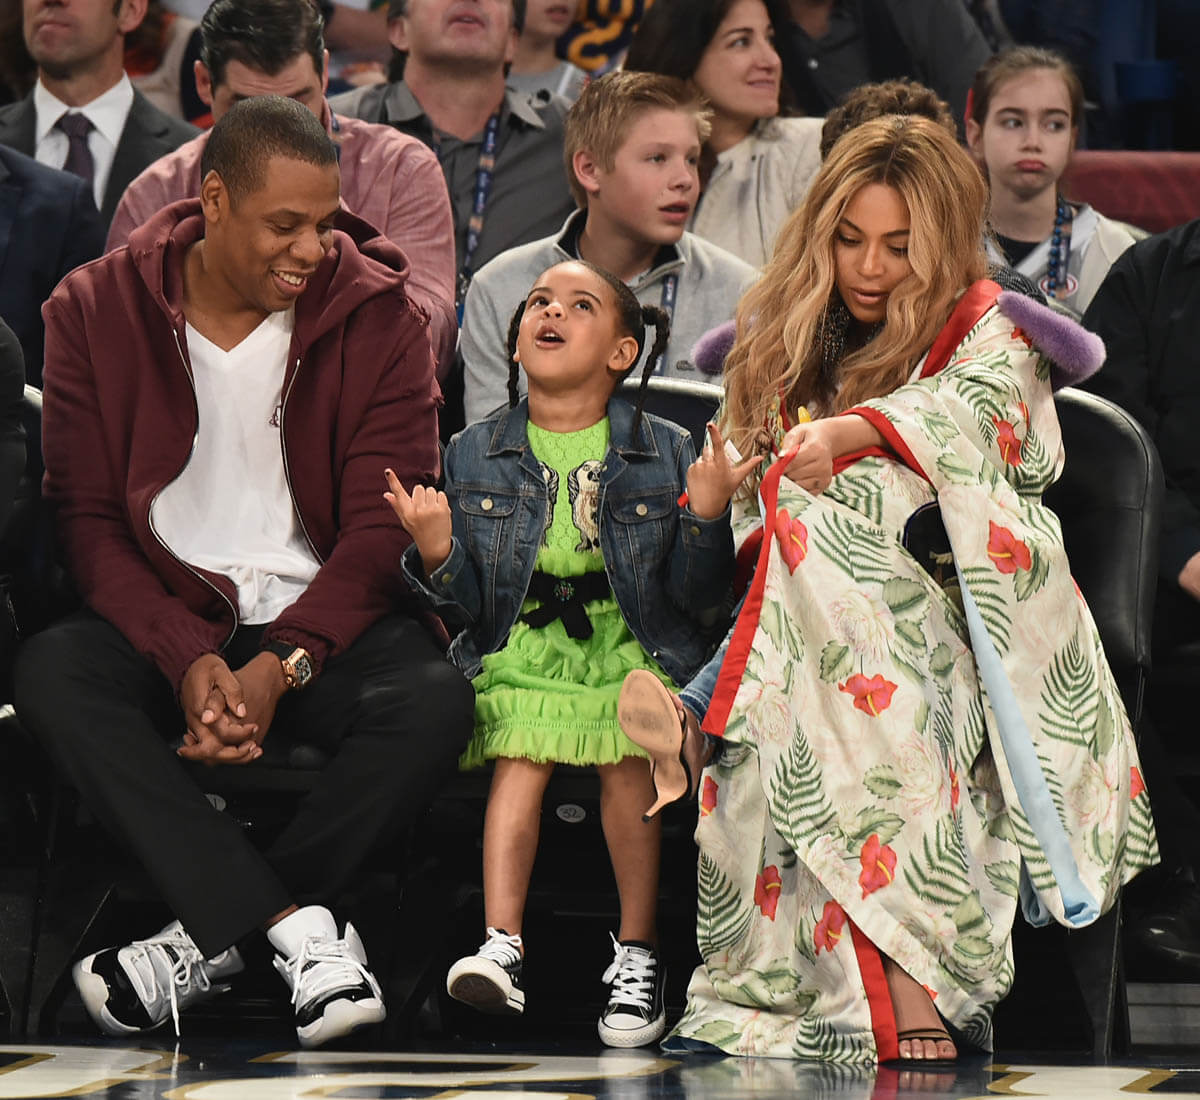 Beyoncé, Jay Z, and Blue Ivy in New Orleans at the NBA All-Star Game1200 x 1100